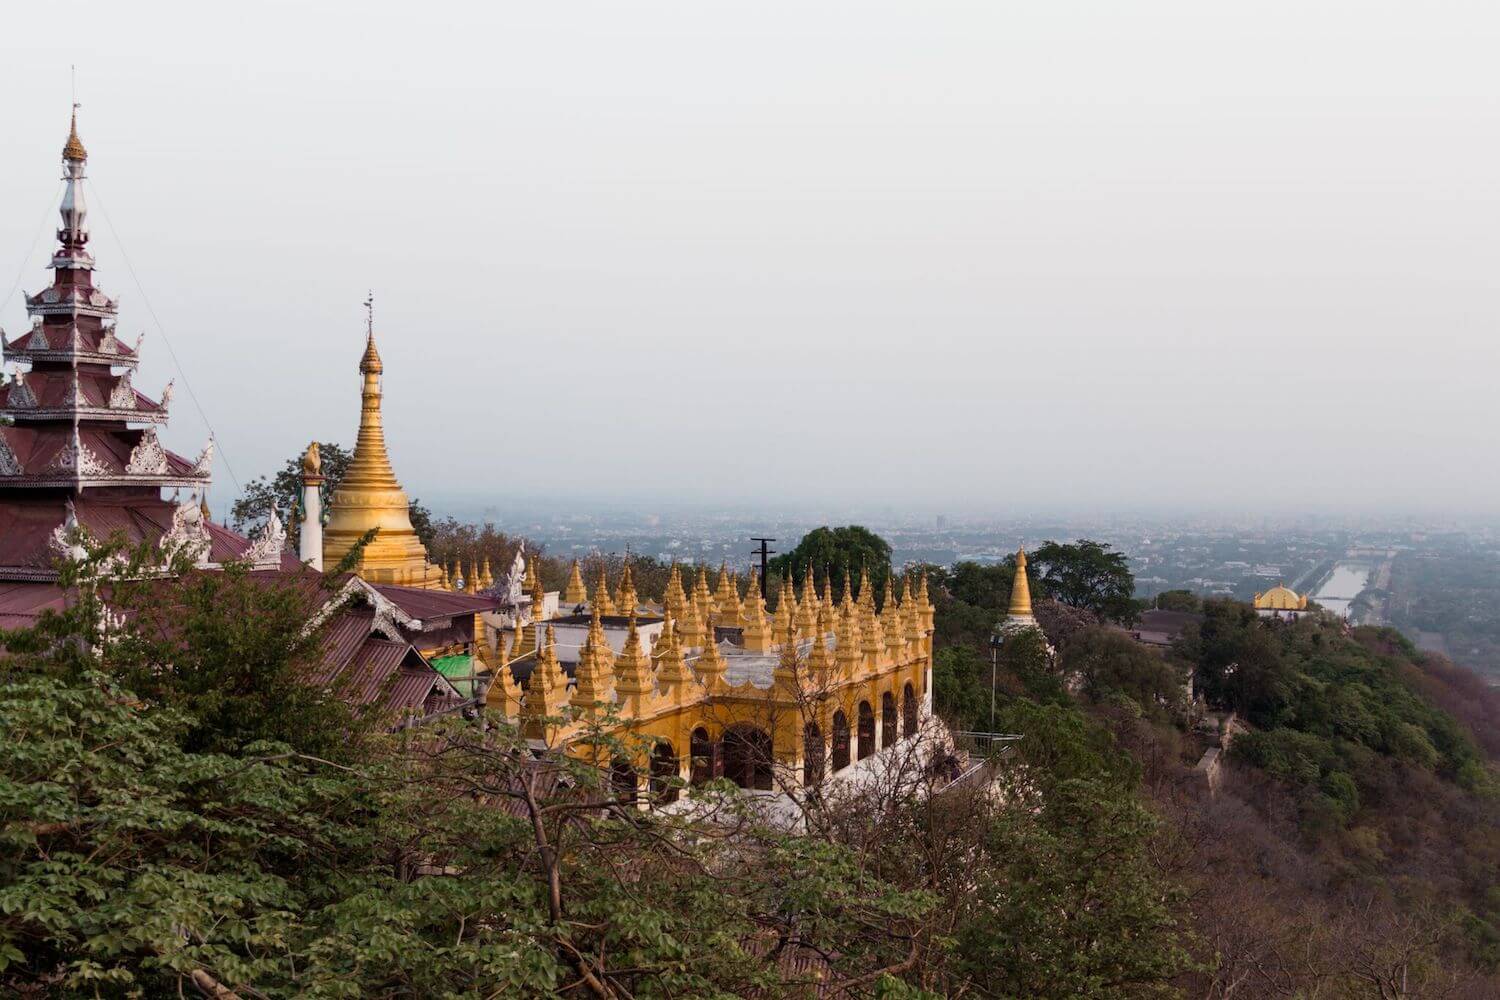 Best Myanmar Itinerary: Photo of the Mandalay Hill and Temple in Mandalay Myanmar, with the golden spires pointing over the trees atop the mountain overlooking Mandalay. Photo taken by Ryan Brown of Lost Boy Memoirs, edited in Lightroom.